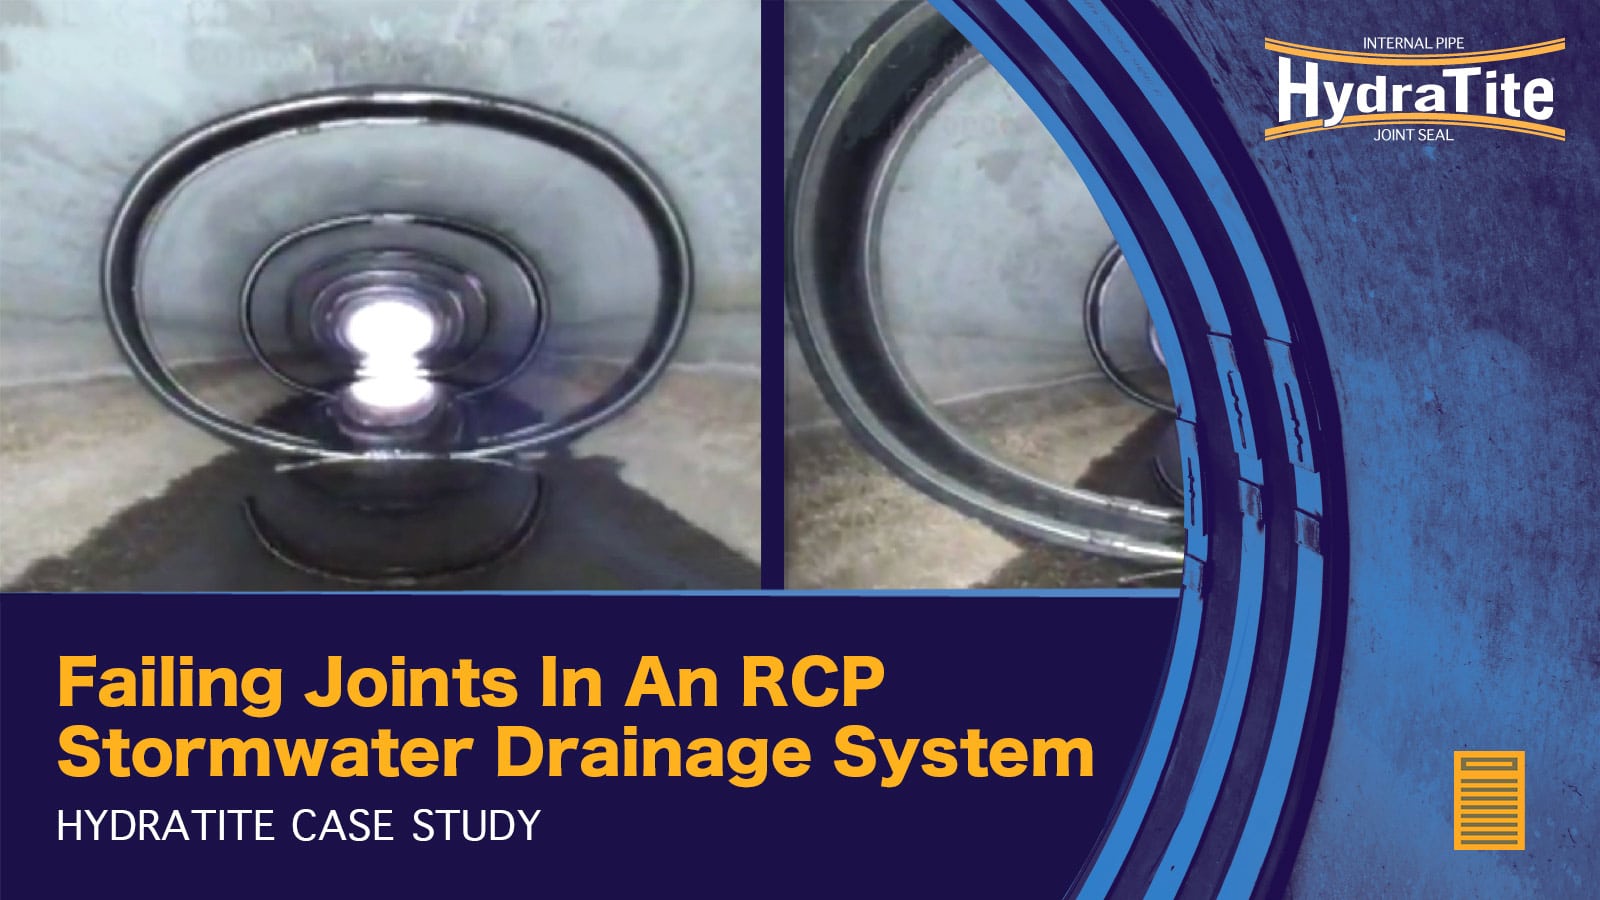 Teaser image of multiple joints sealed utilizing the HydraTite Internal pipe joint seal, 'Failing Joints In An RCP Stormwater Drainage System, HydraTite Case Study'